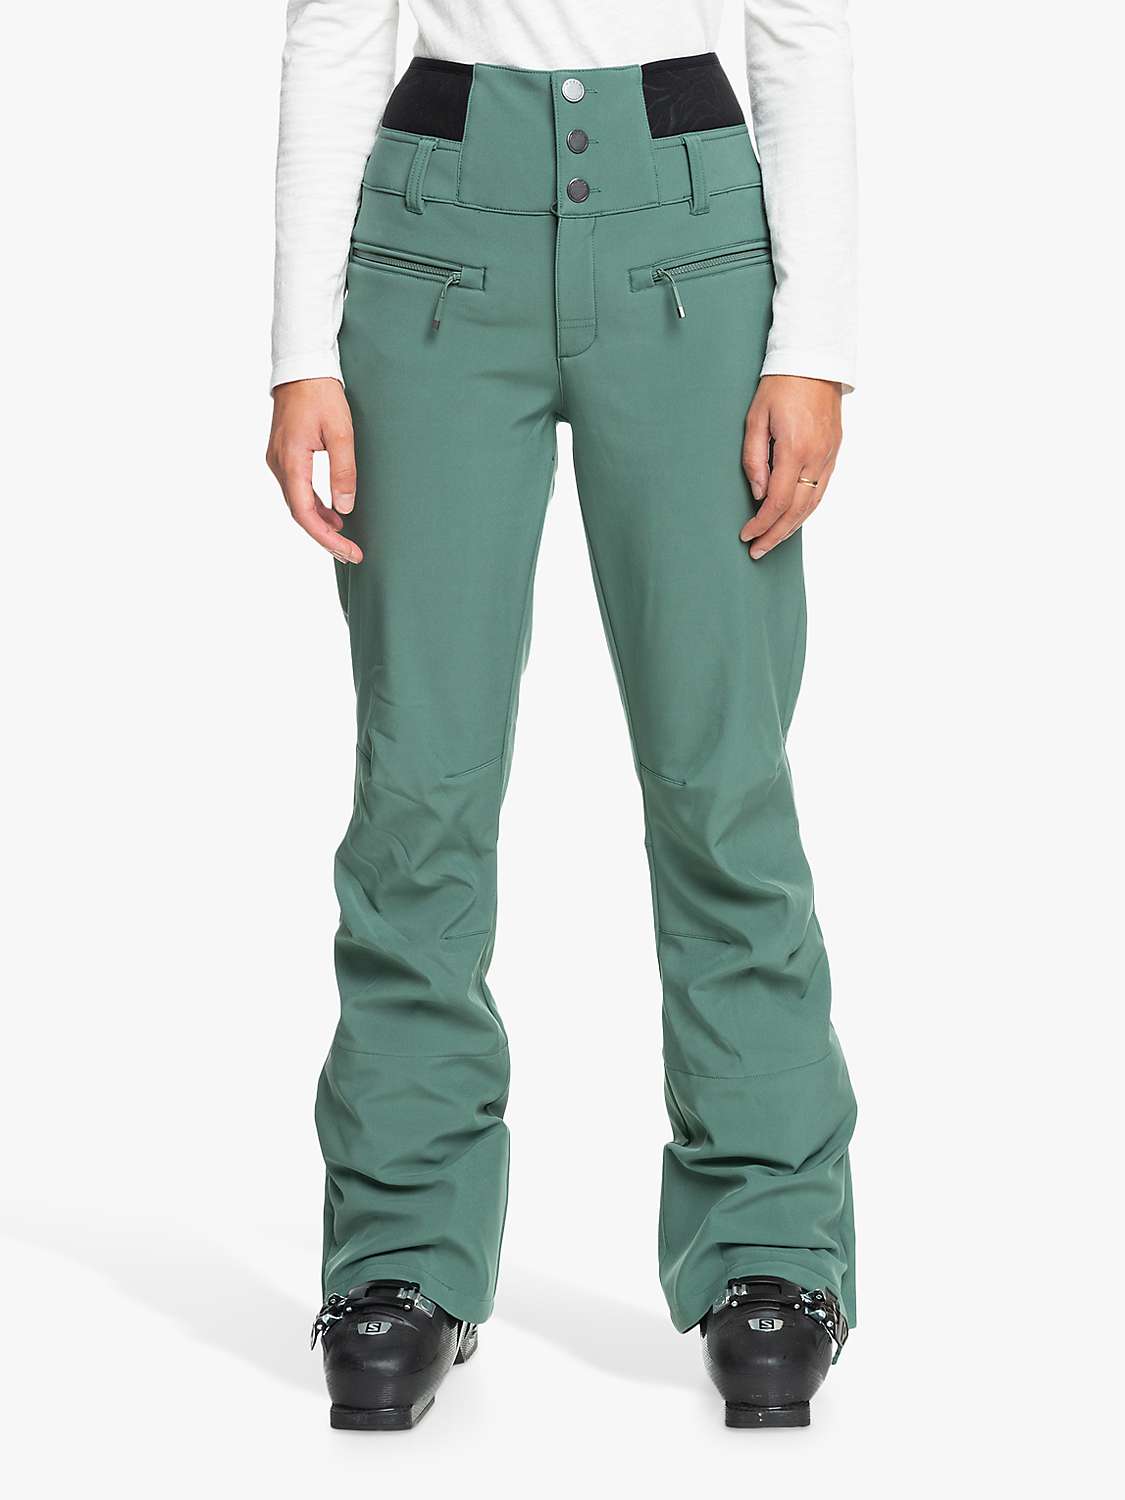 Buy Roxy Rising High Technical Snow/Ski Trousers Online at johnlewis.com